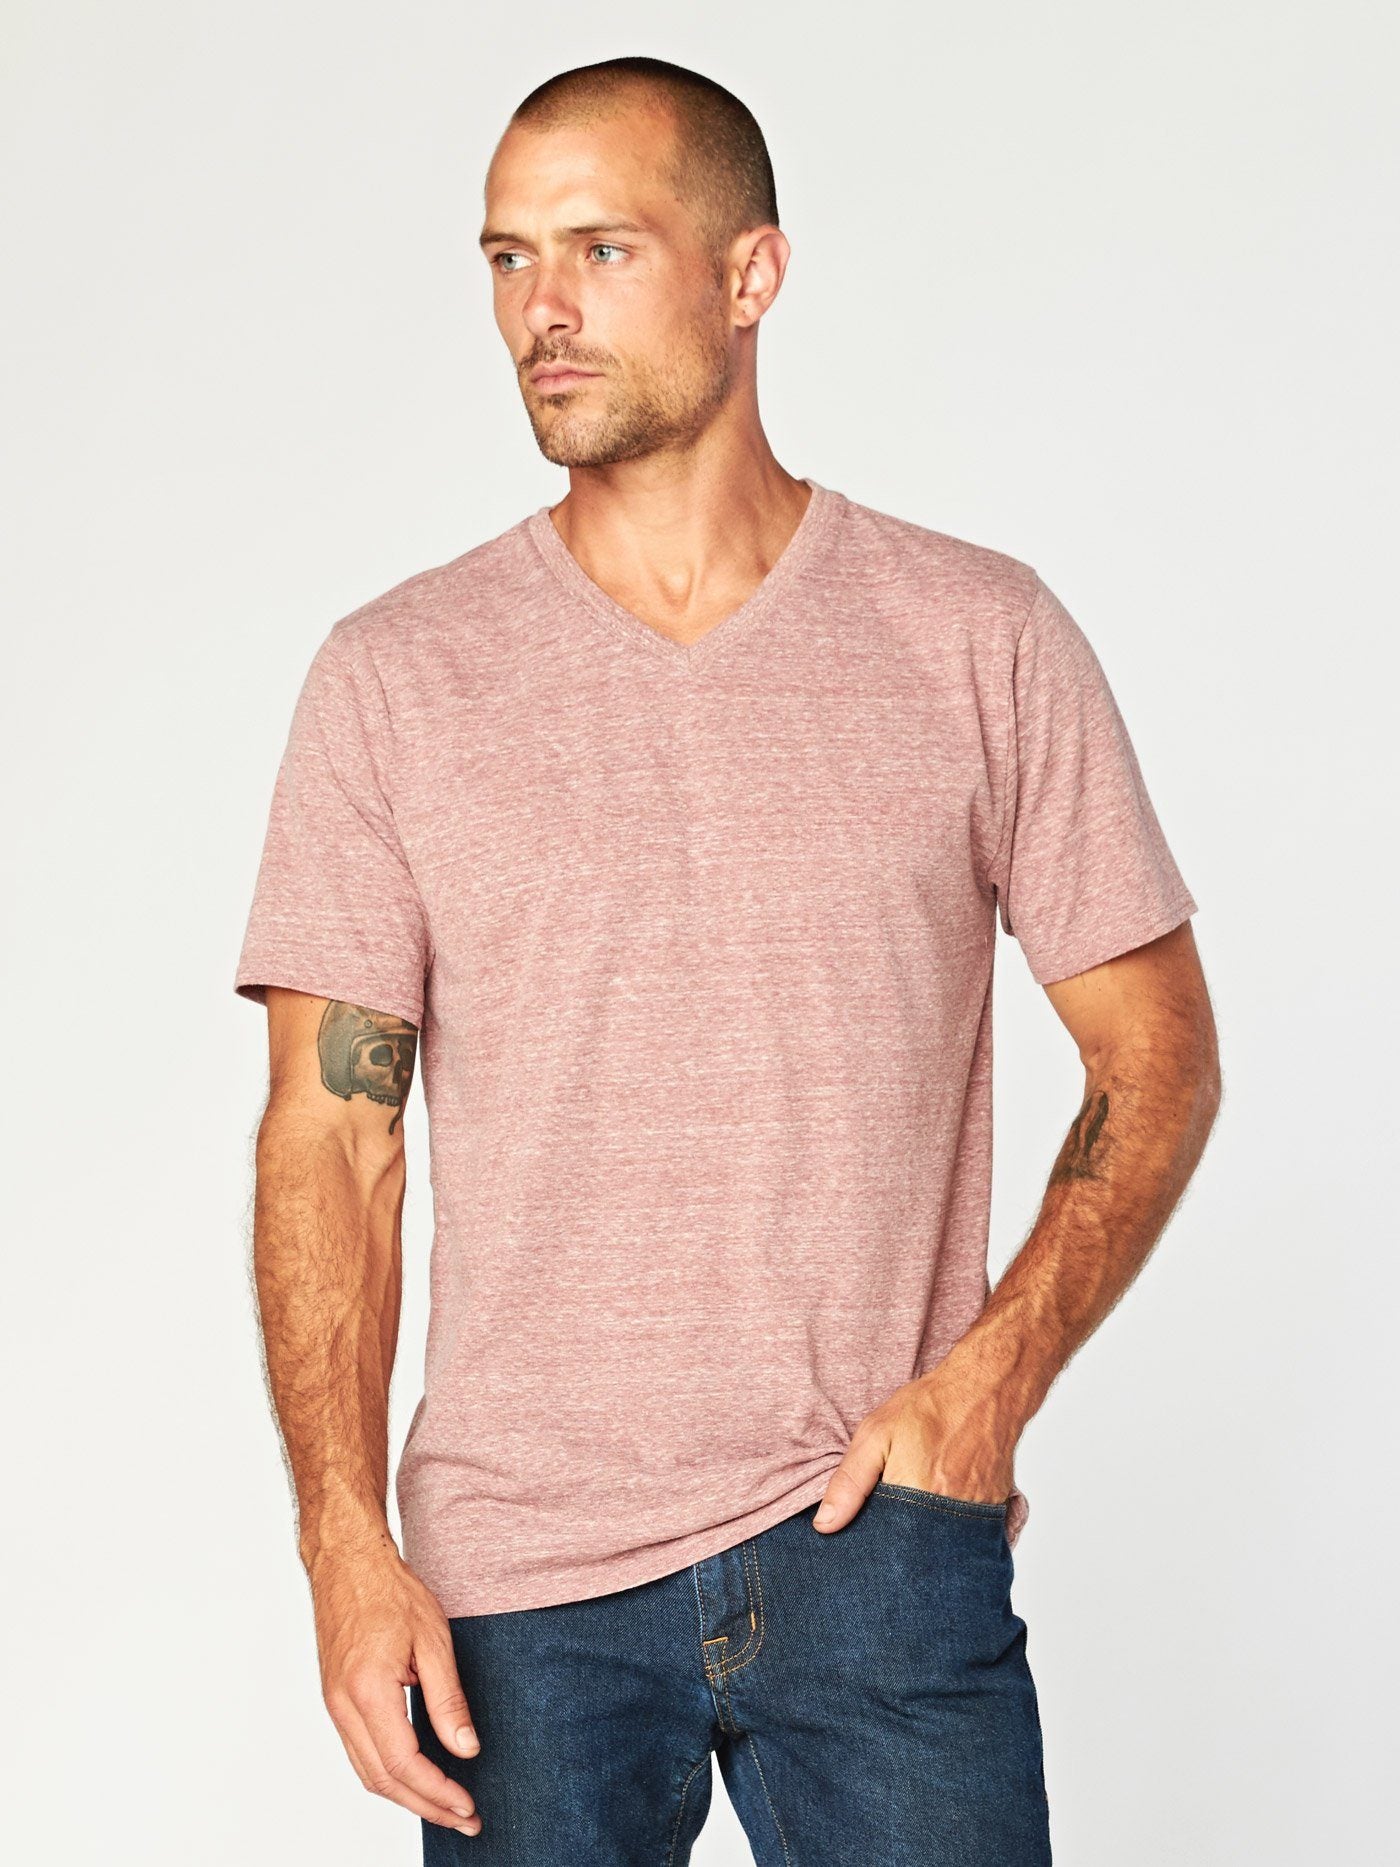 Triblend Short Sleeve V Neck Tee Mens Tops Threads 4 Thought S Brick Red